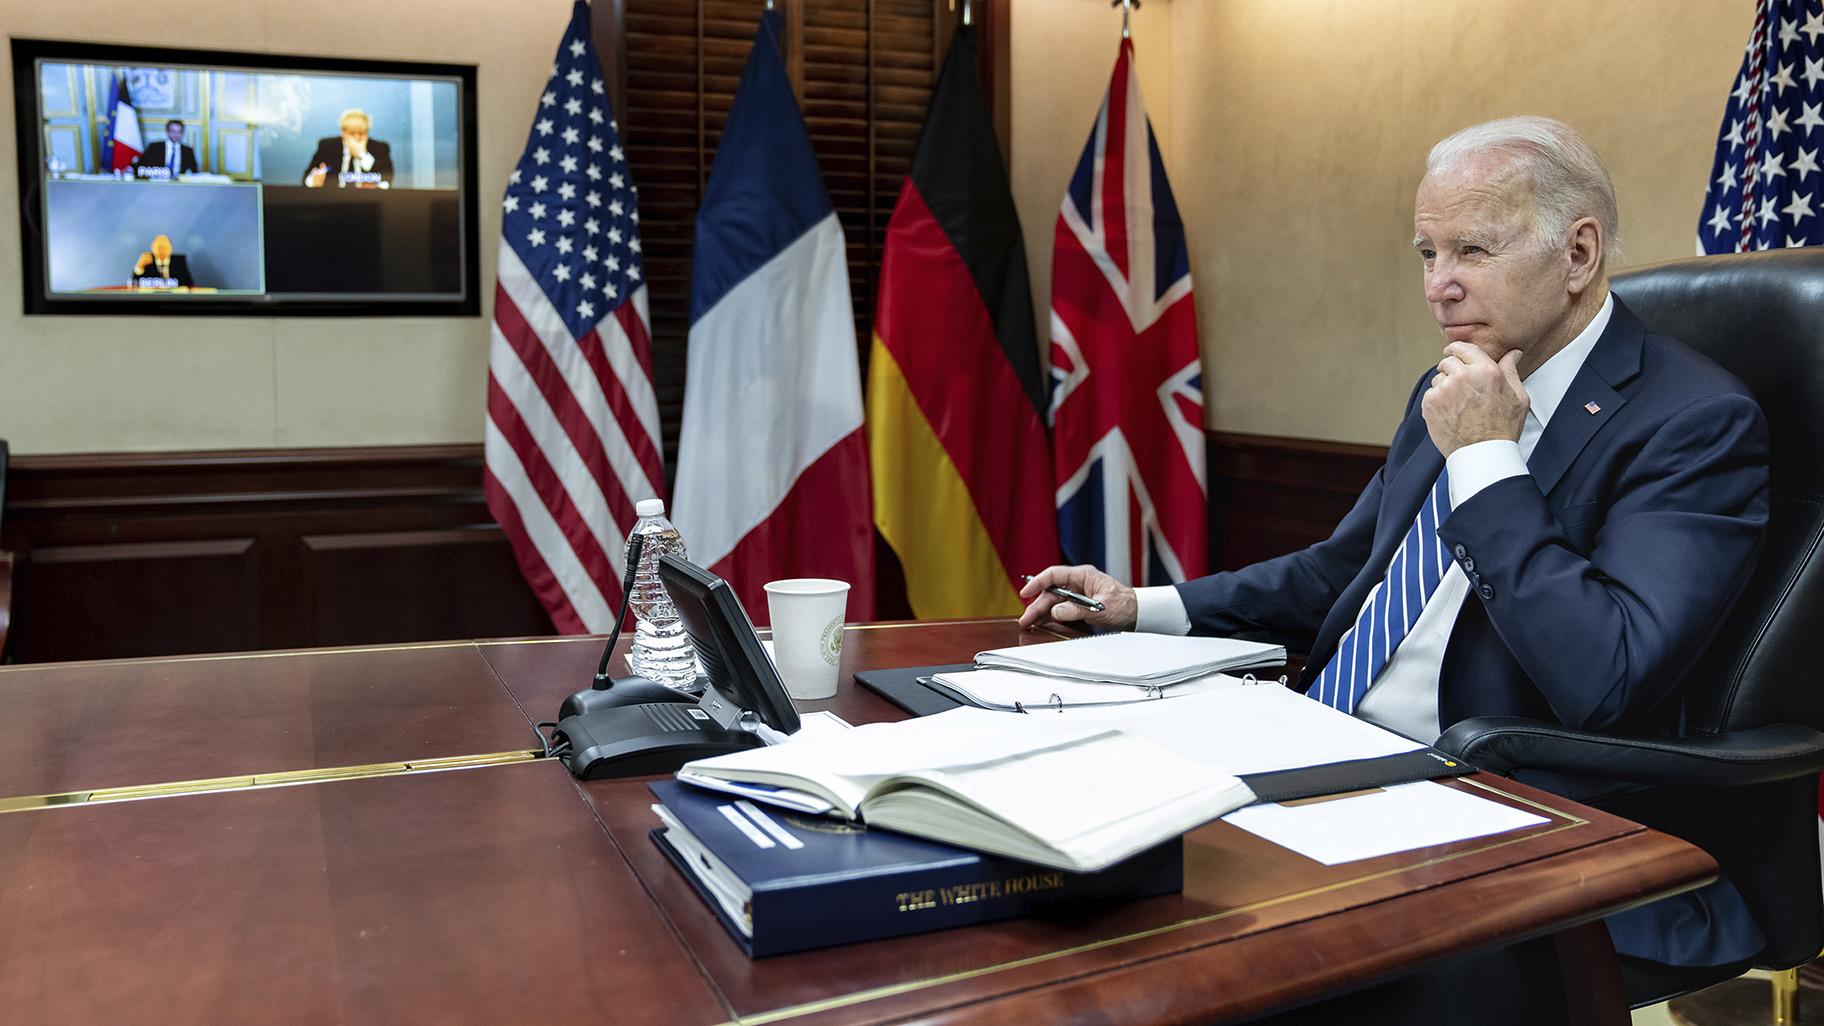 In this image provided by the White House, President Joe Biden listens during a secure video call with French President Emmanuel Macron, German Chancellor Olaf Scholz and British Prime Minister Boris Johnson in the Situation Room at the White House Monday, March 7, 2022, in Washington. (Adam Schultz / The White House via AP)